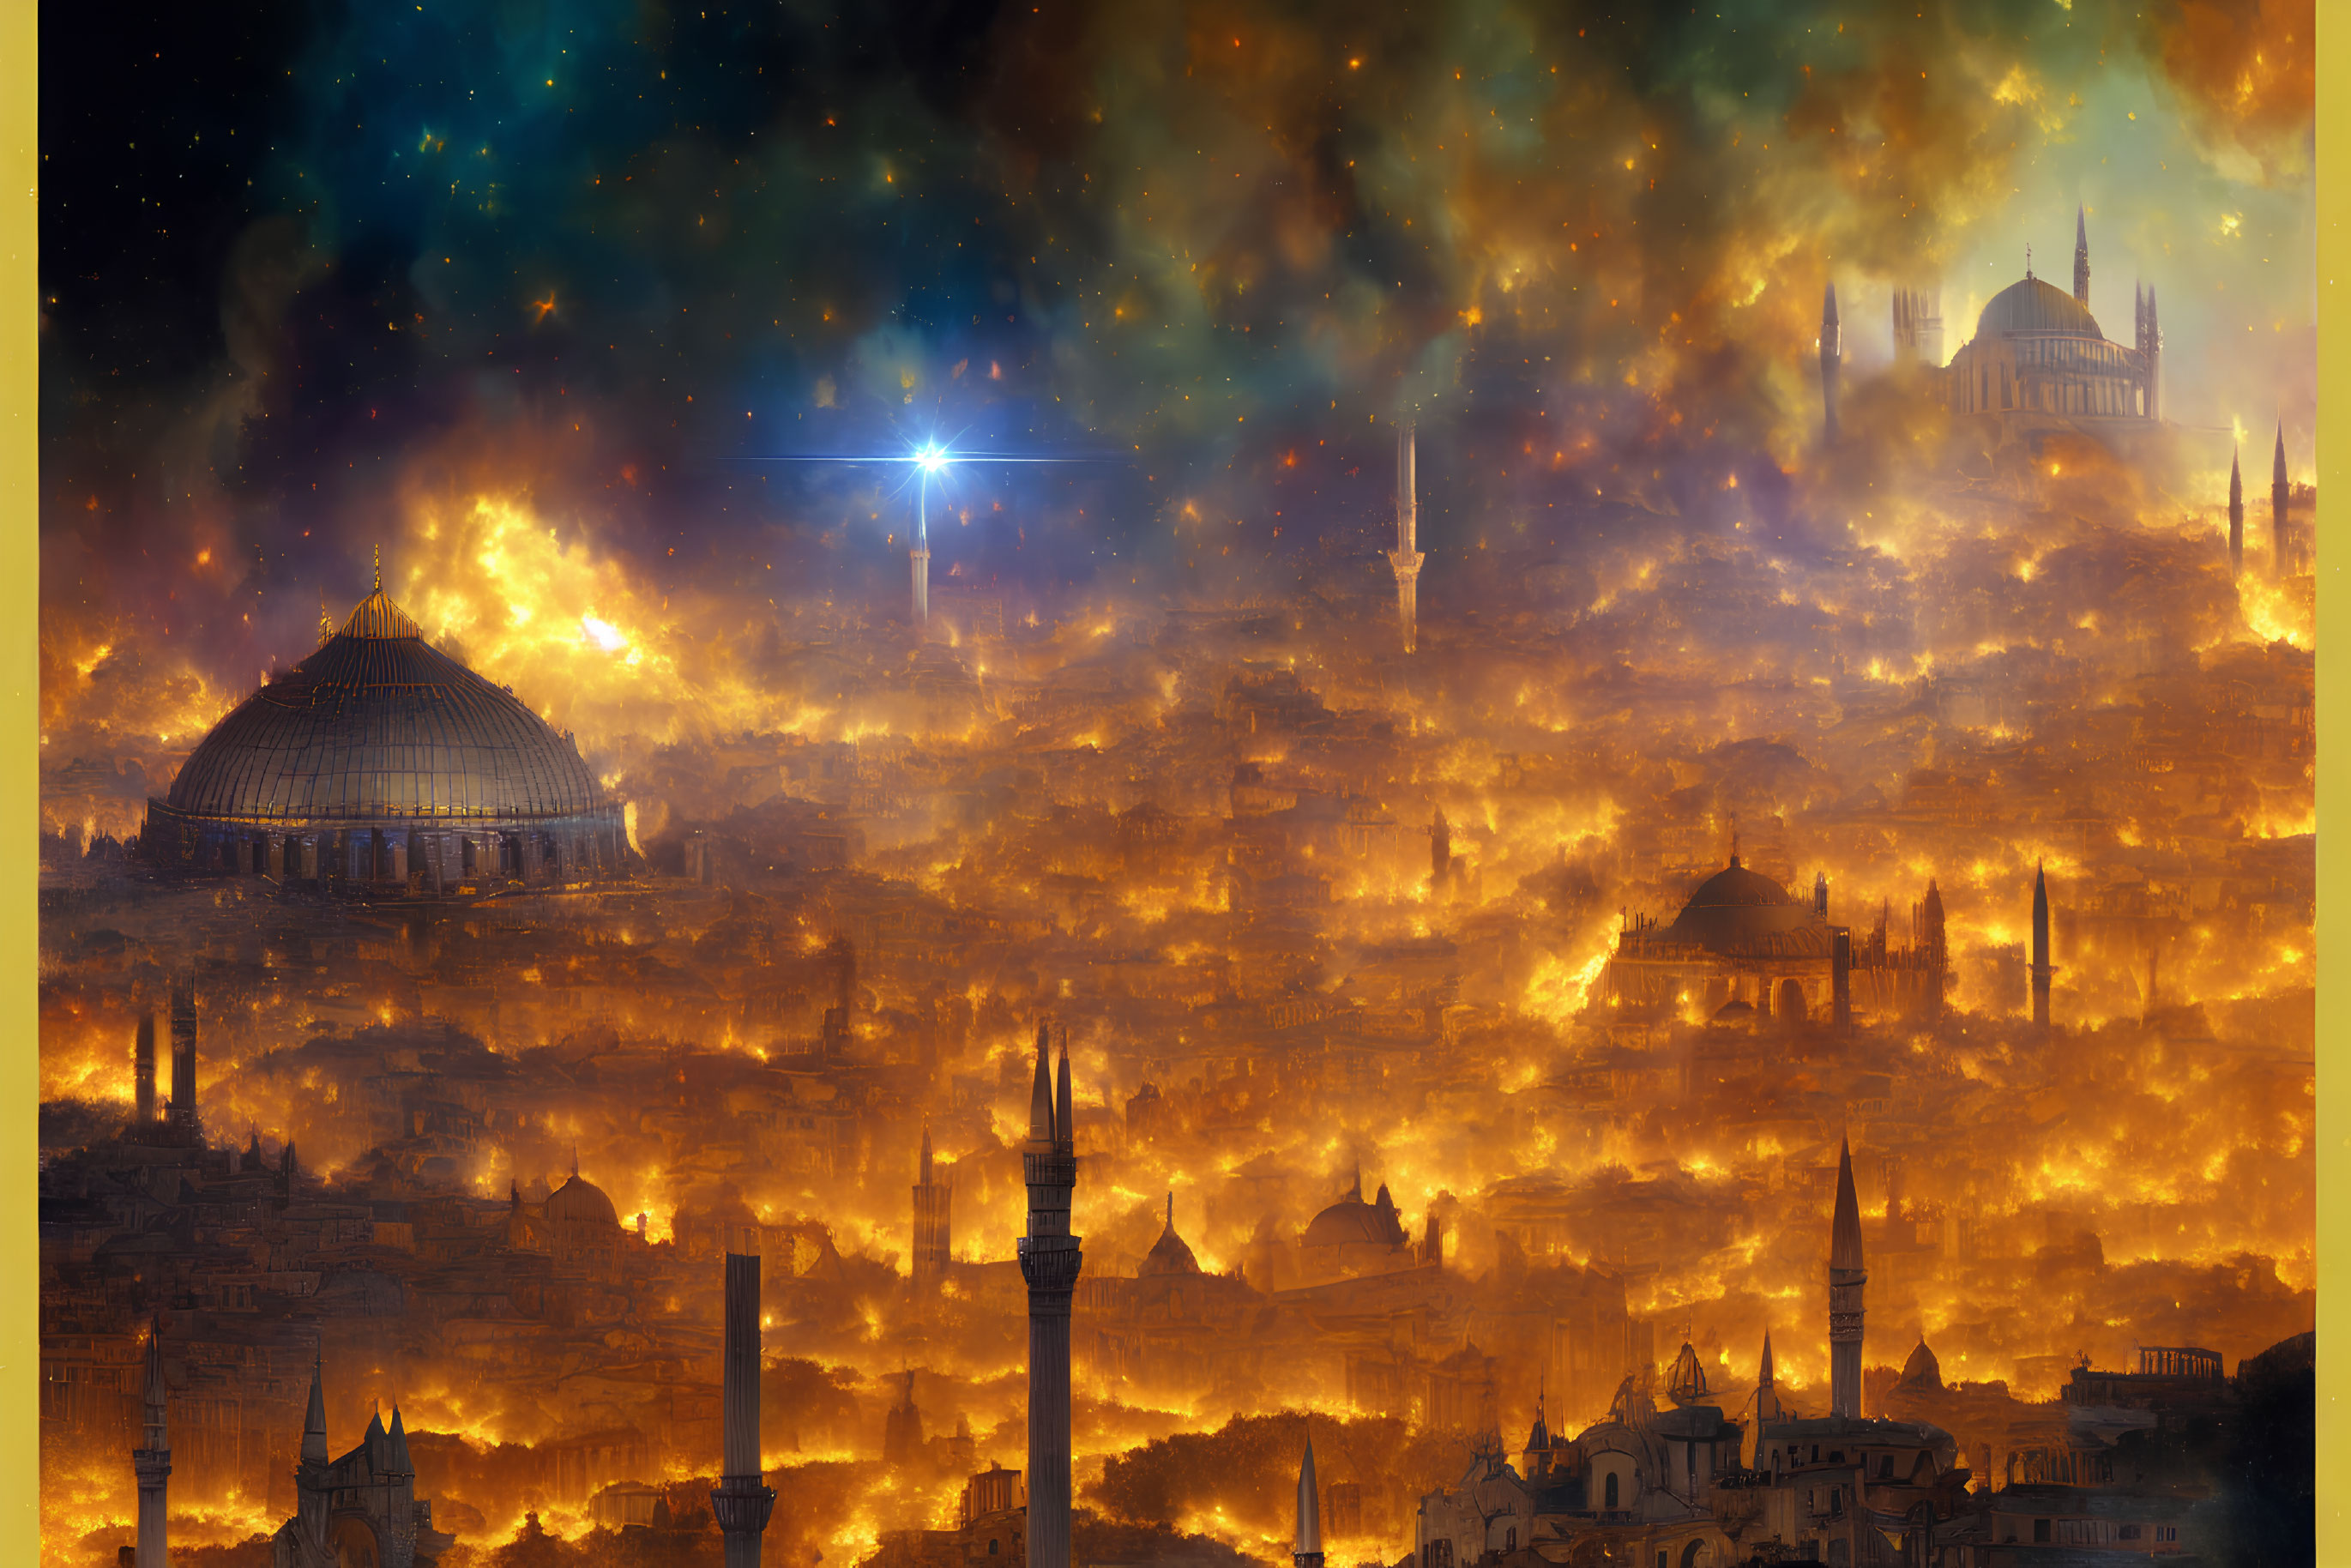 Fantastical cityscape with fiery glow, starry skies, domes, and minarets